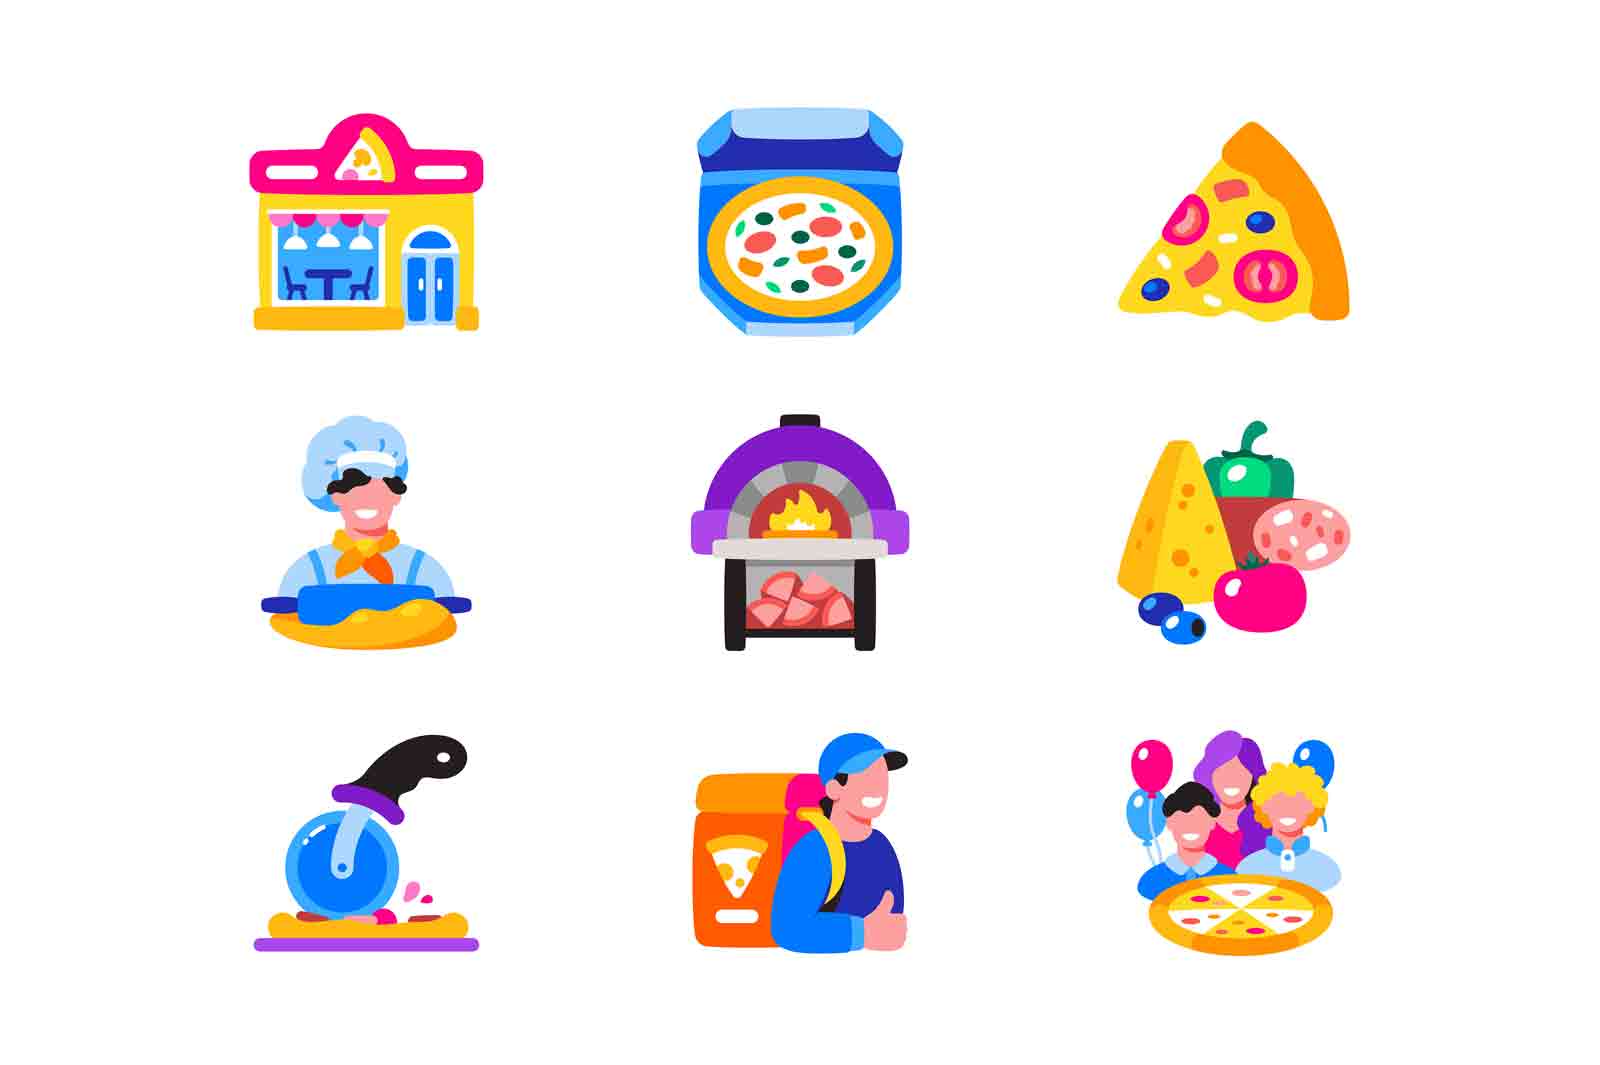 Pizza vector icon set. Cooking and deliver pizza to enjoy it with friends and family.